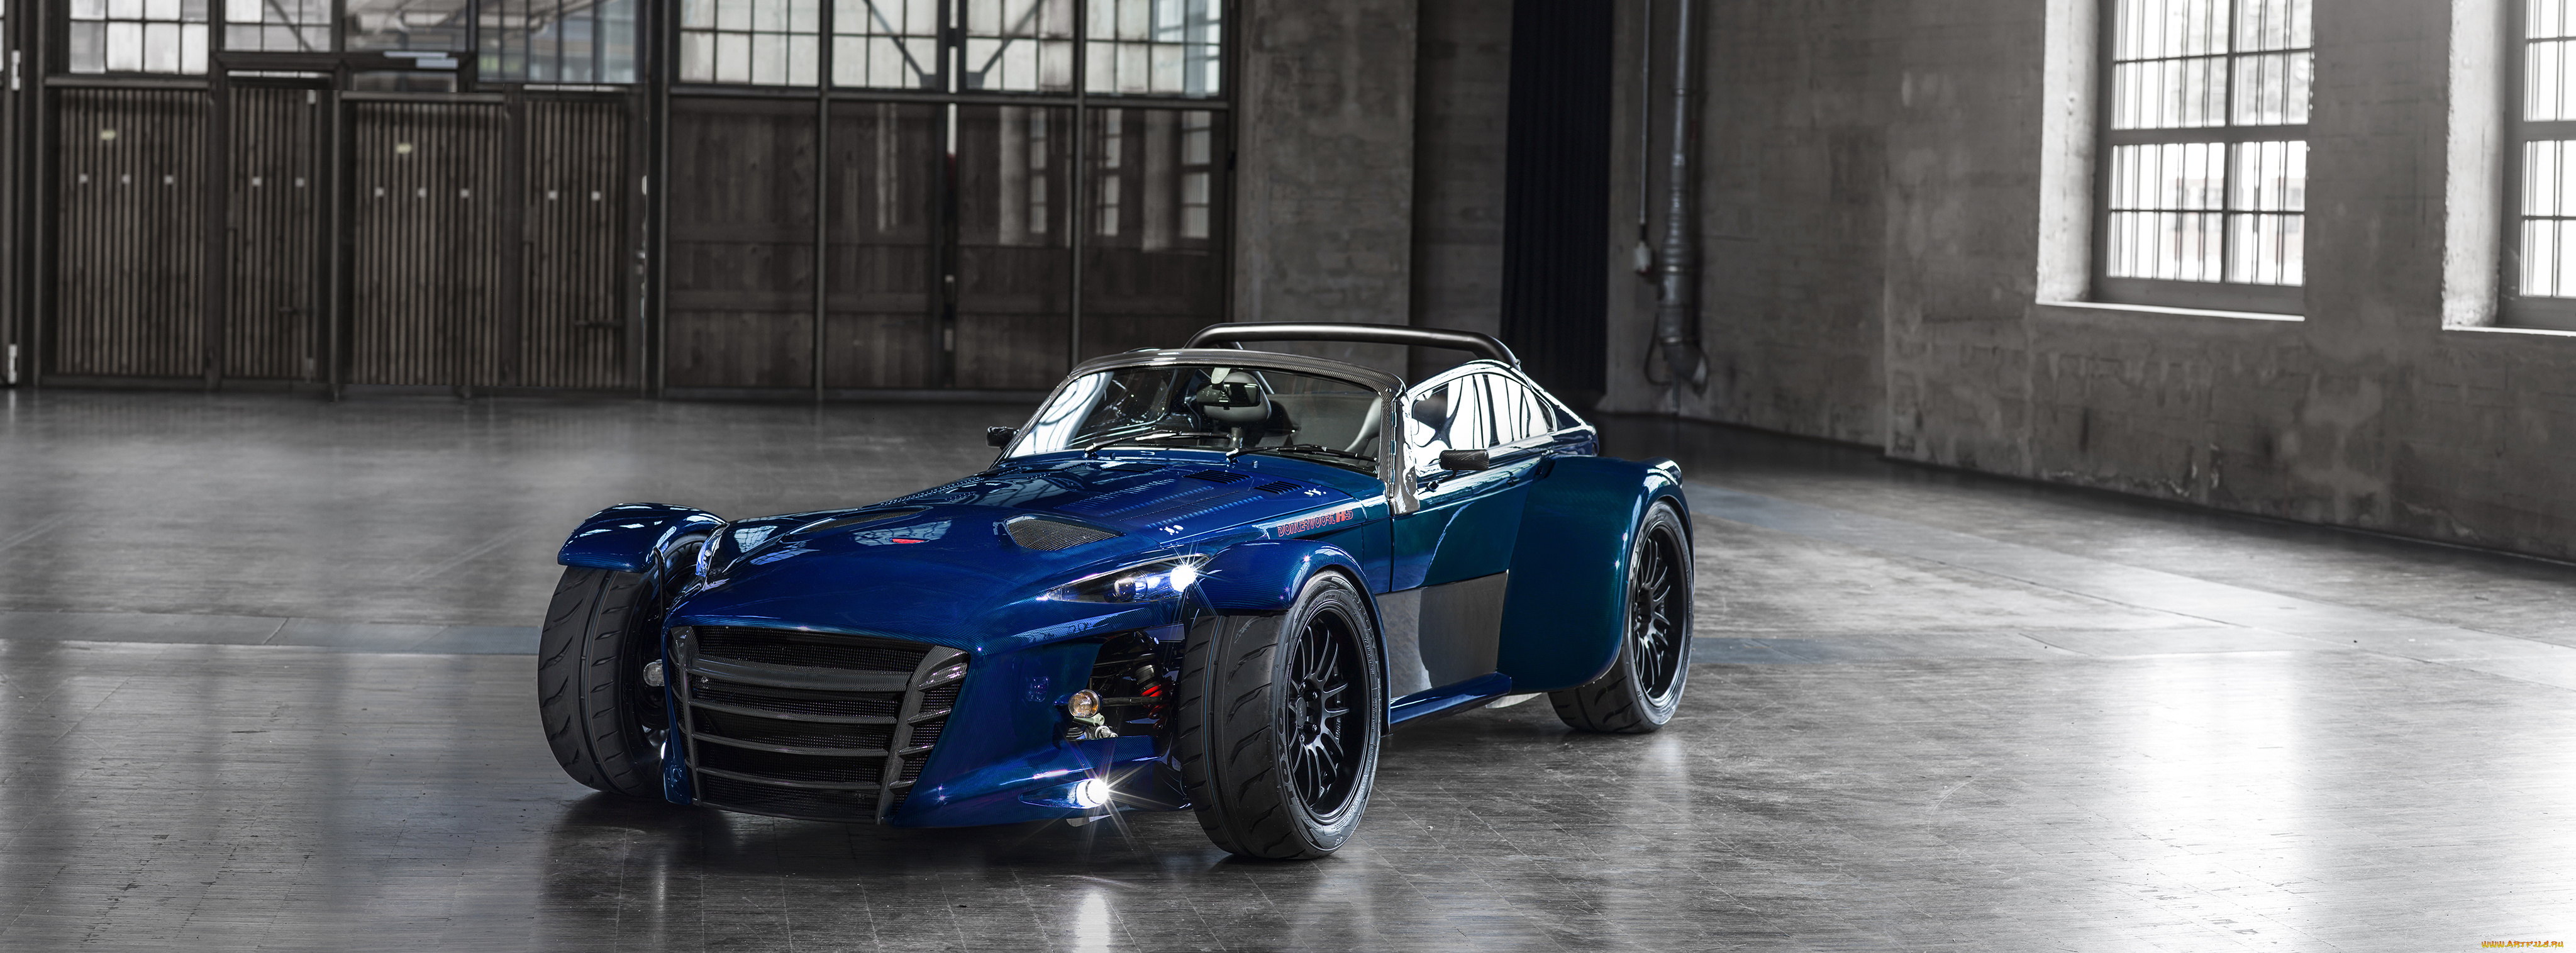 donkervoort, d8, gto, rs, автомобили, donkervoort